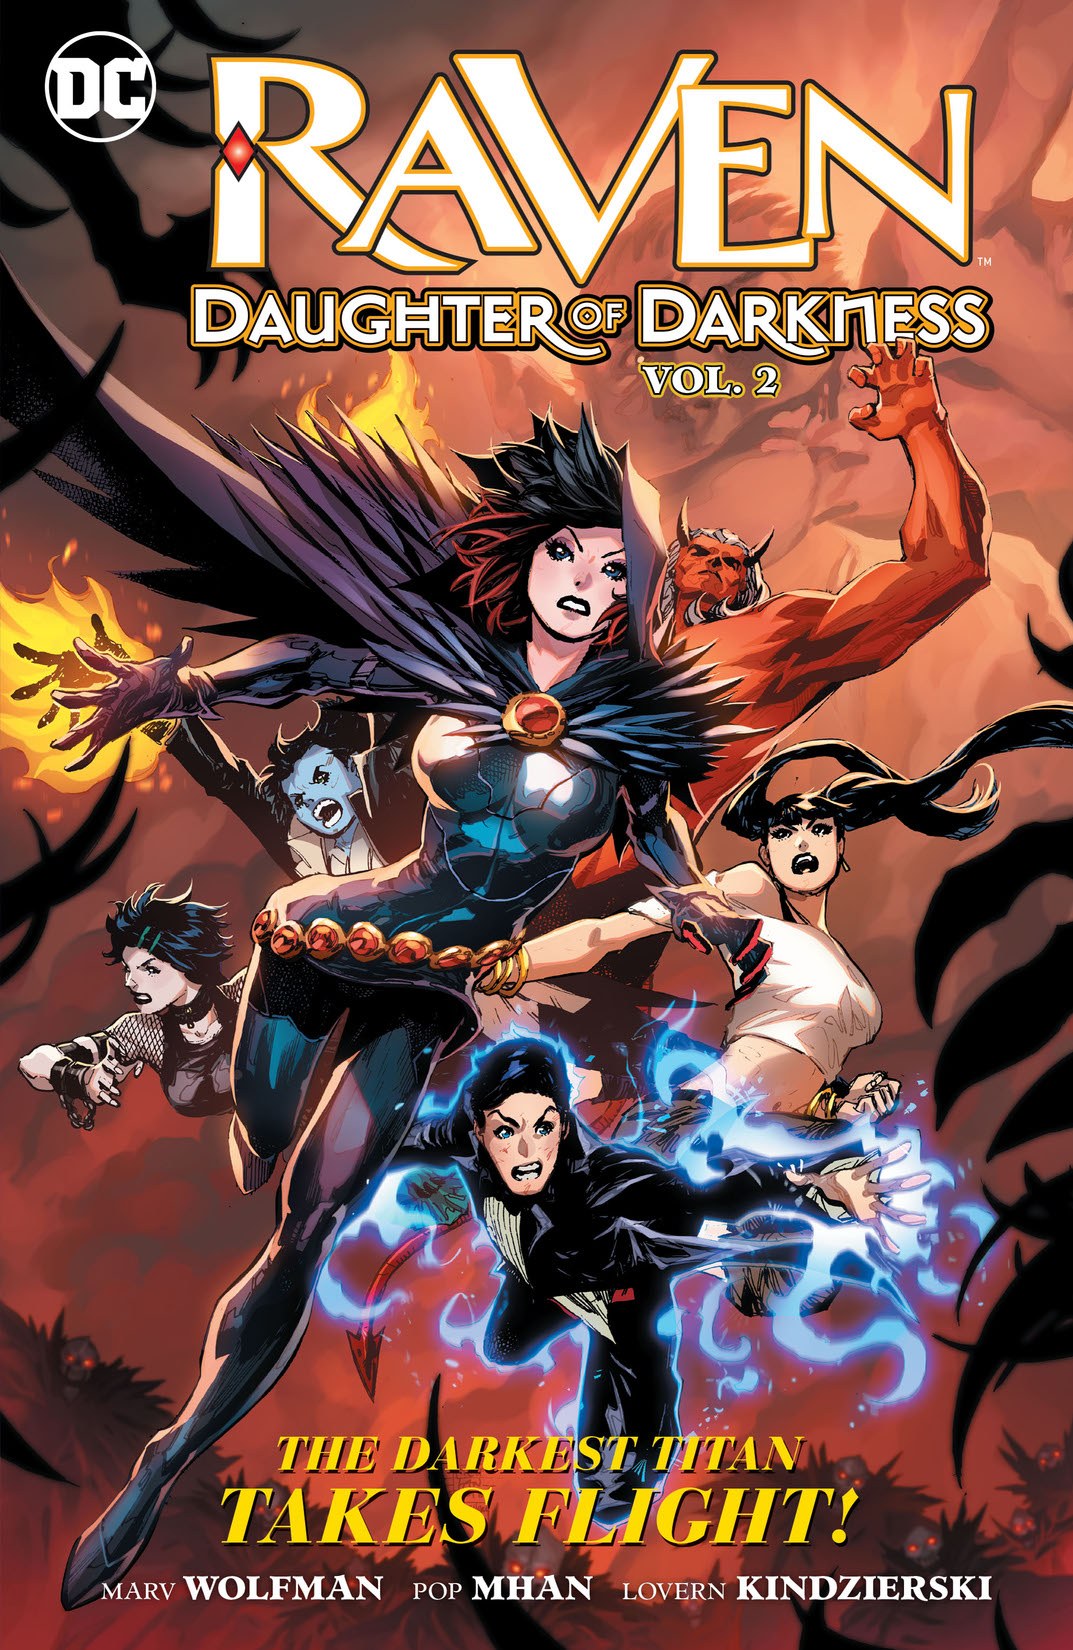 Raven: Daughter of Darkness Vol. 2 preview images